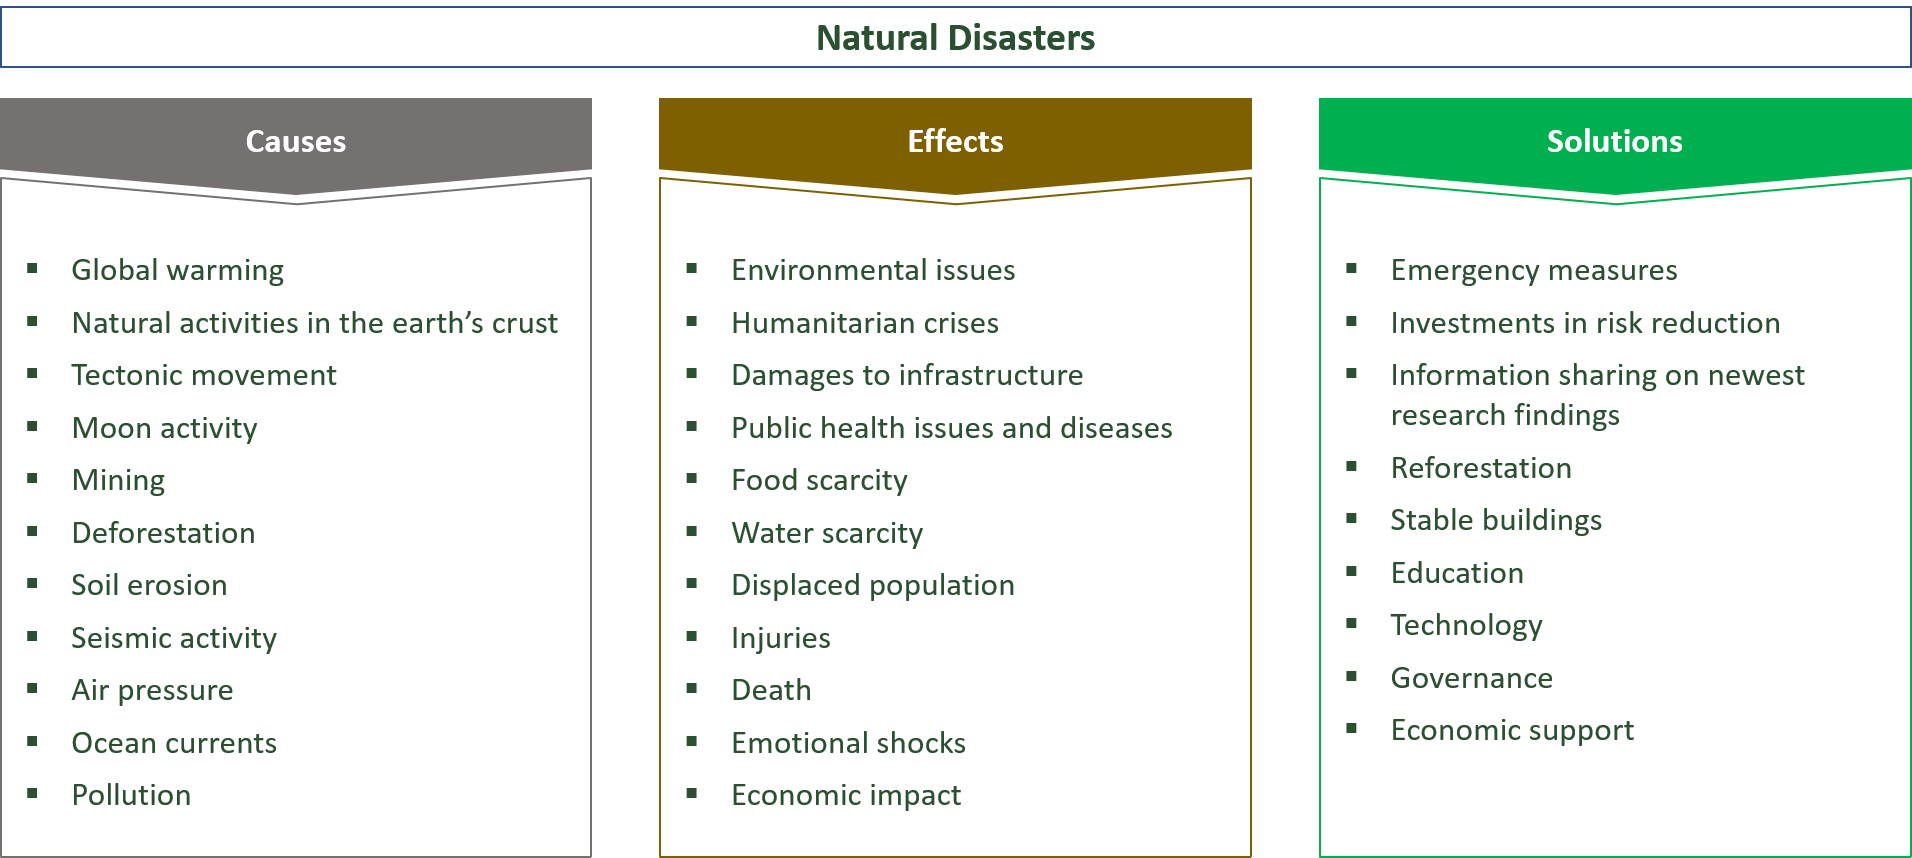 causes, effects and solutions for natural disasters